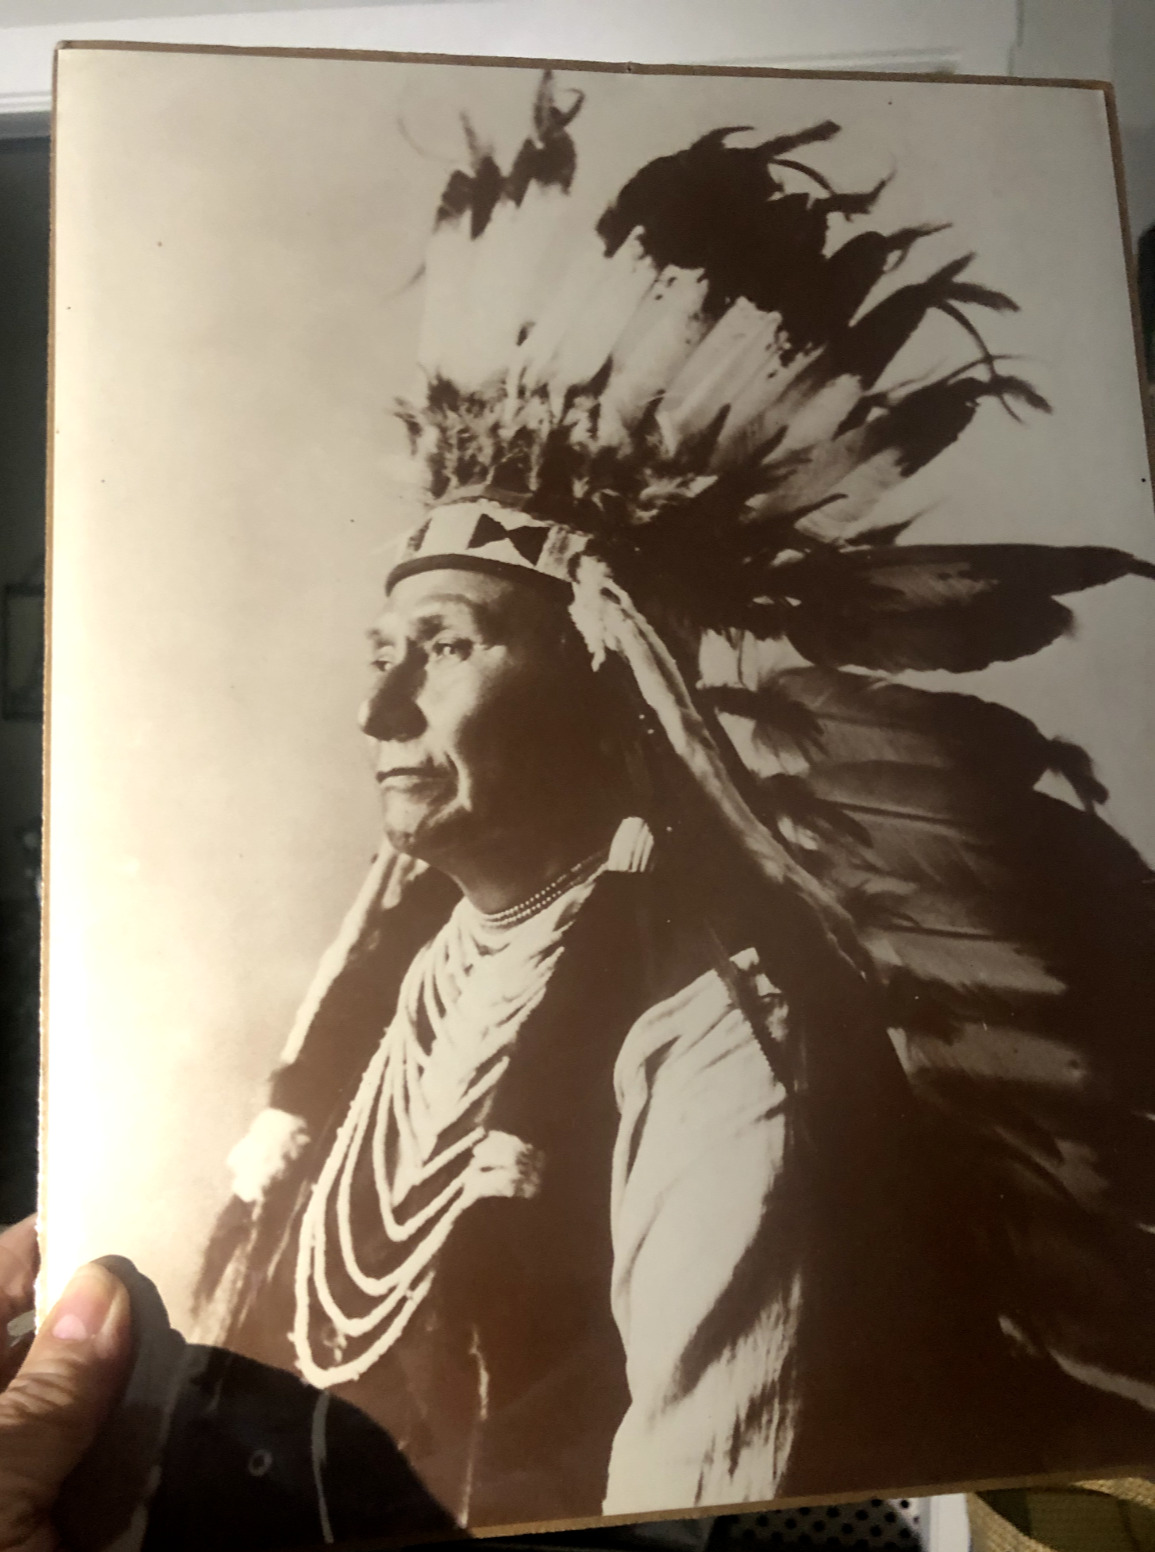 Vtg Sealed Print Poster 11X14 CHIEF JOSEPH Nez Perces OLD WEST COLLECTOR SERIES